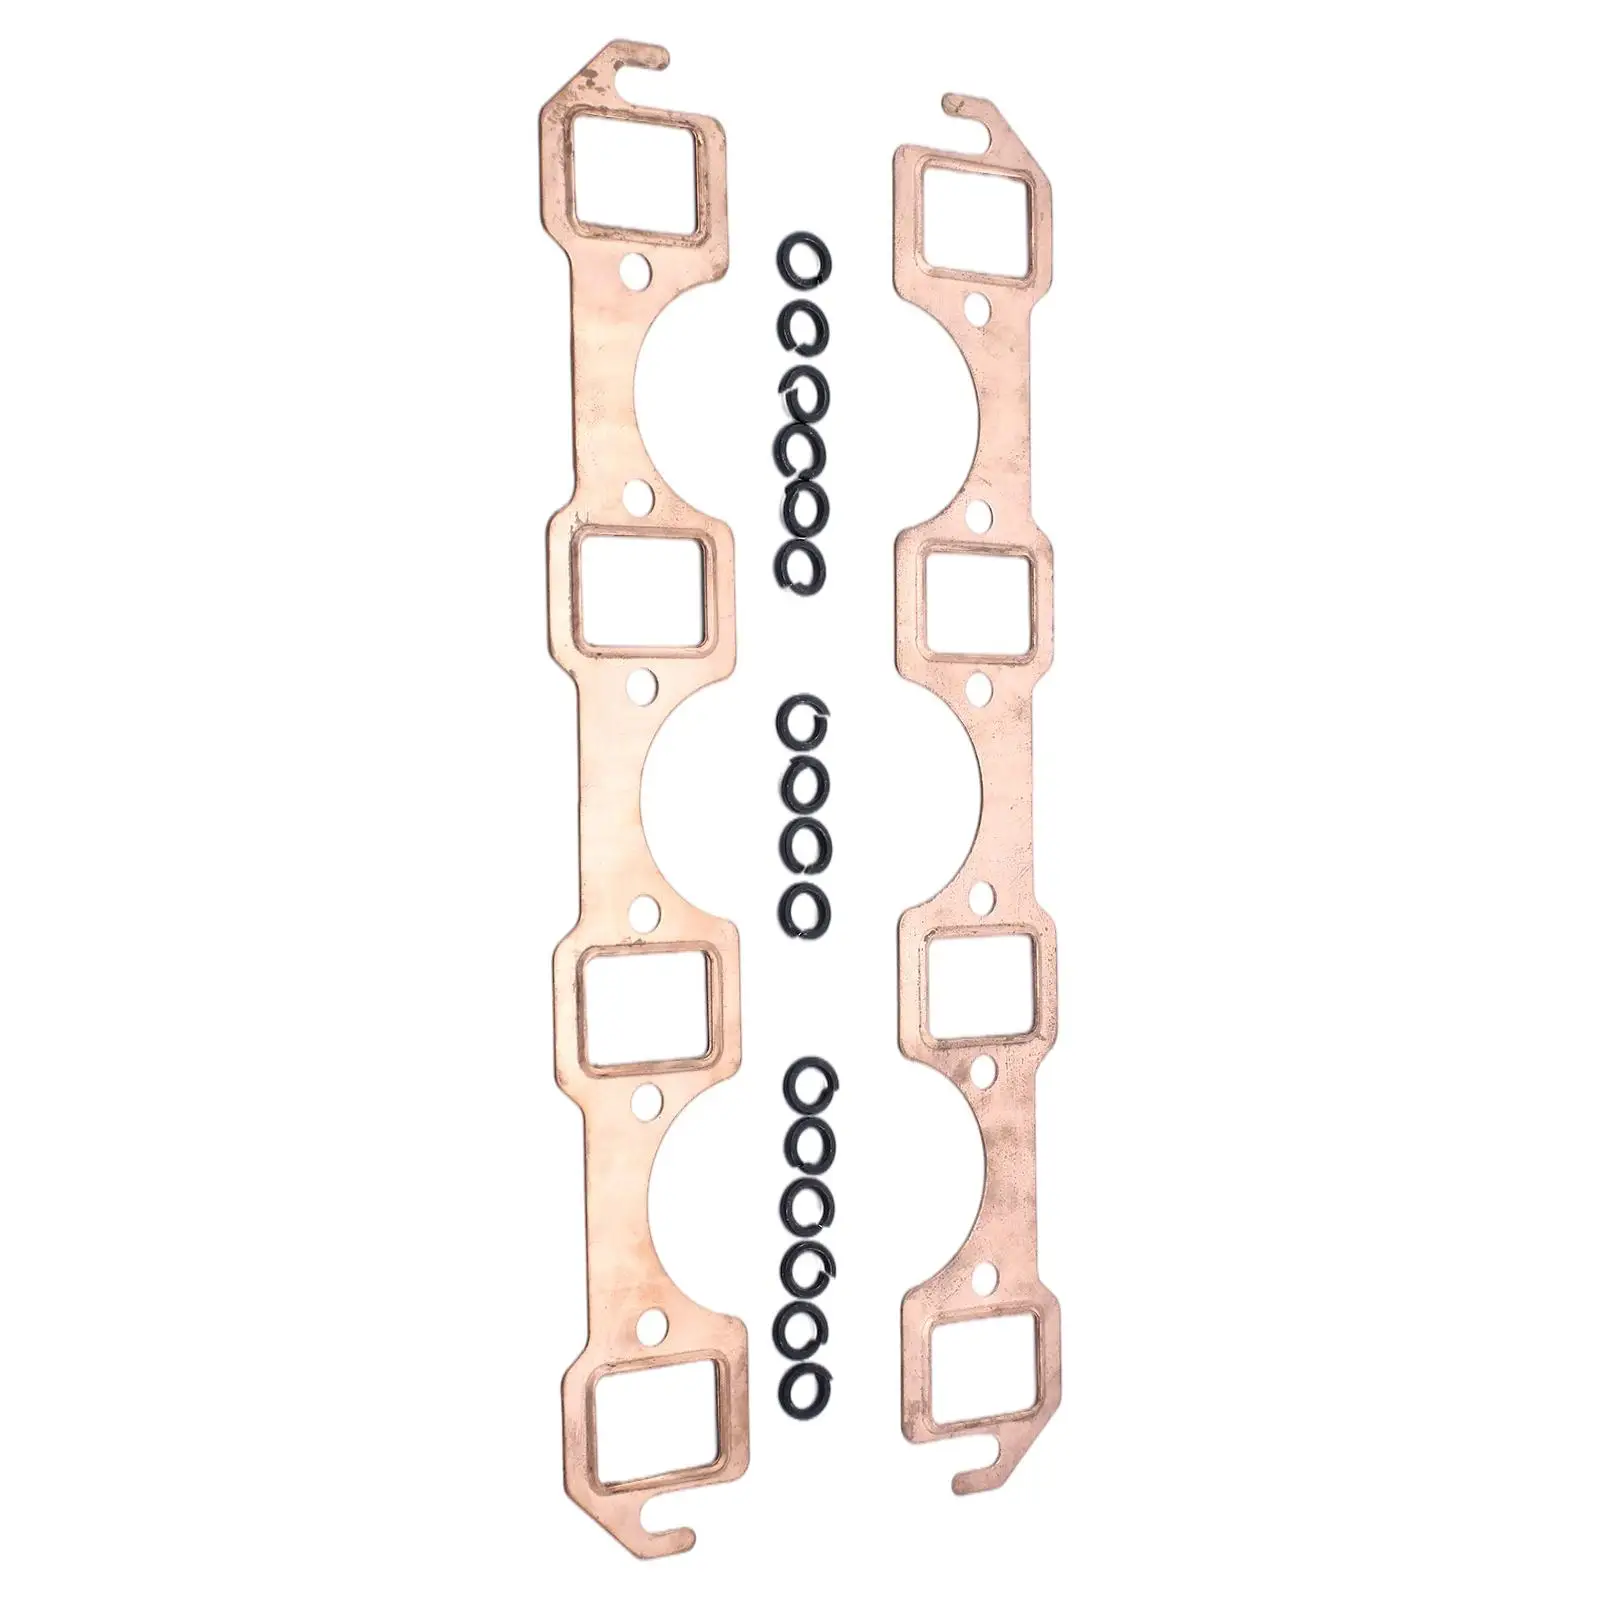 2Pcs Exhaust Header Gaskets Square Small Block Port Gasket Copper Reusable Fit for Ford 302 5.0L 351W 5.8L 260 4.3L 289 4.8L